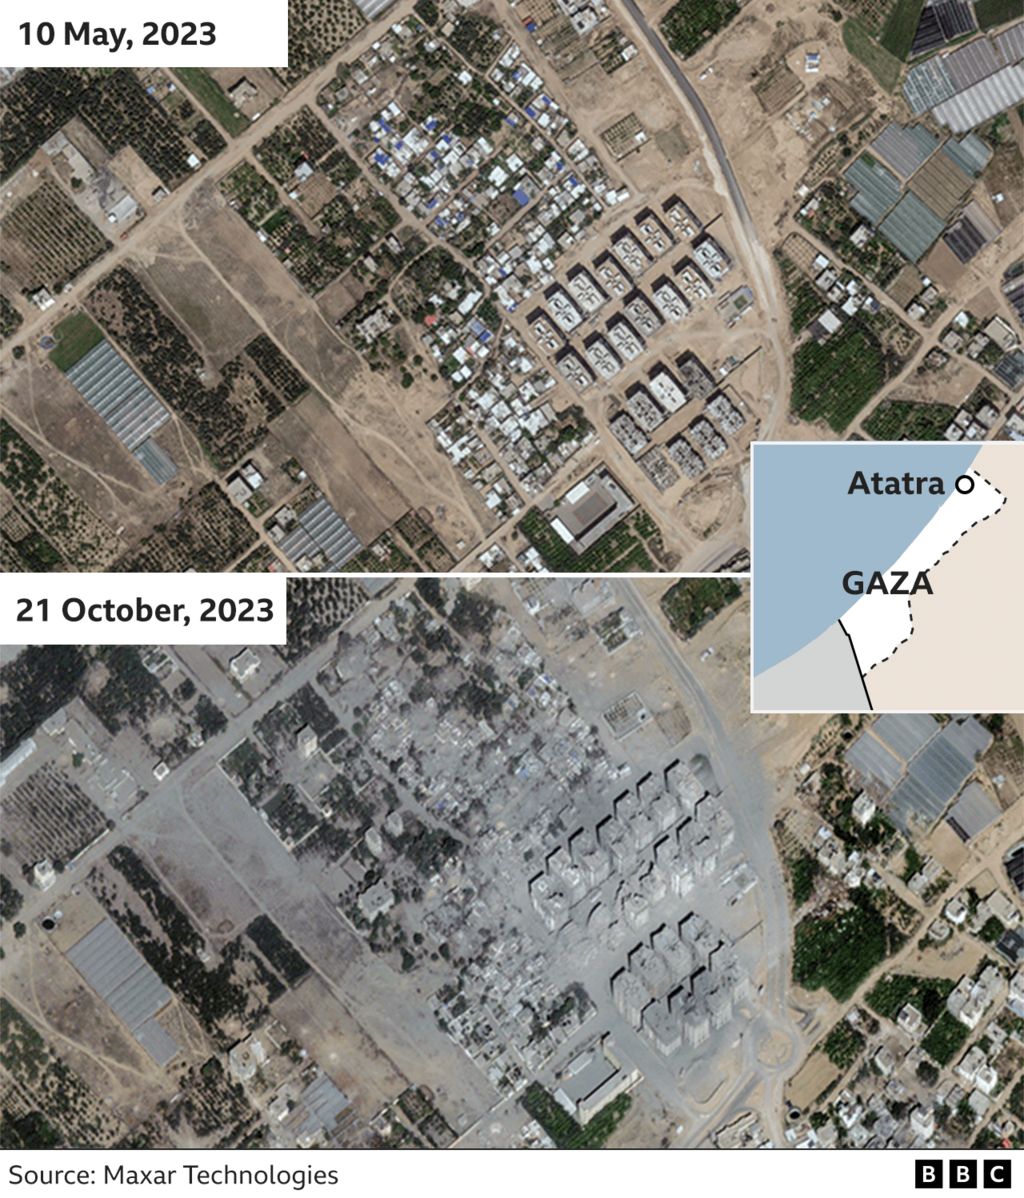 Satellite images of Atatra in Gaza, showing the area before and after Israeli aerial attacks that destroyed several buildings